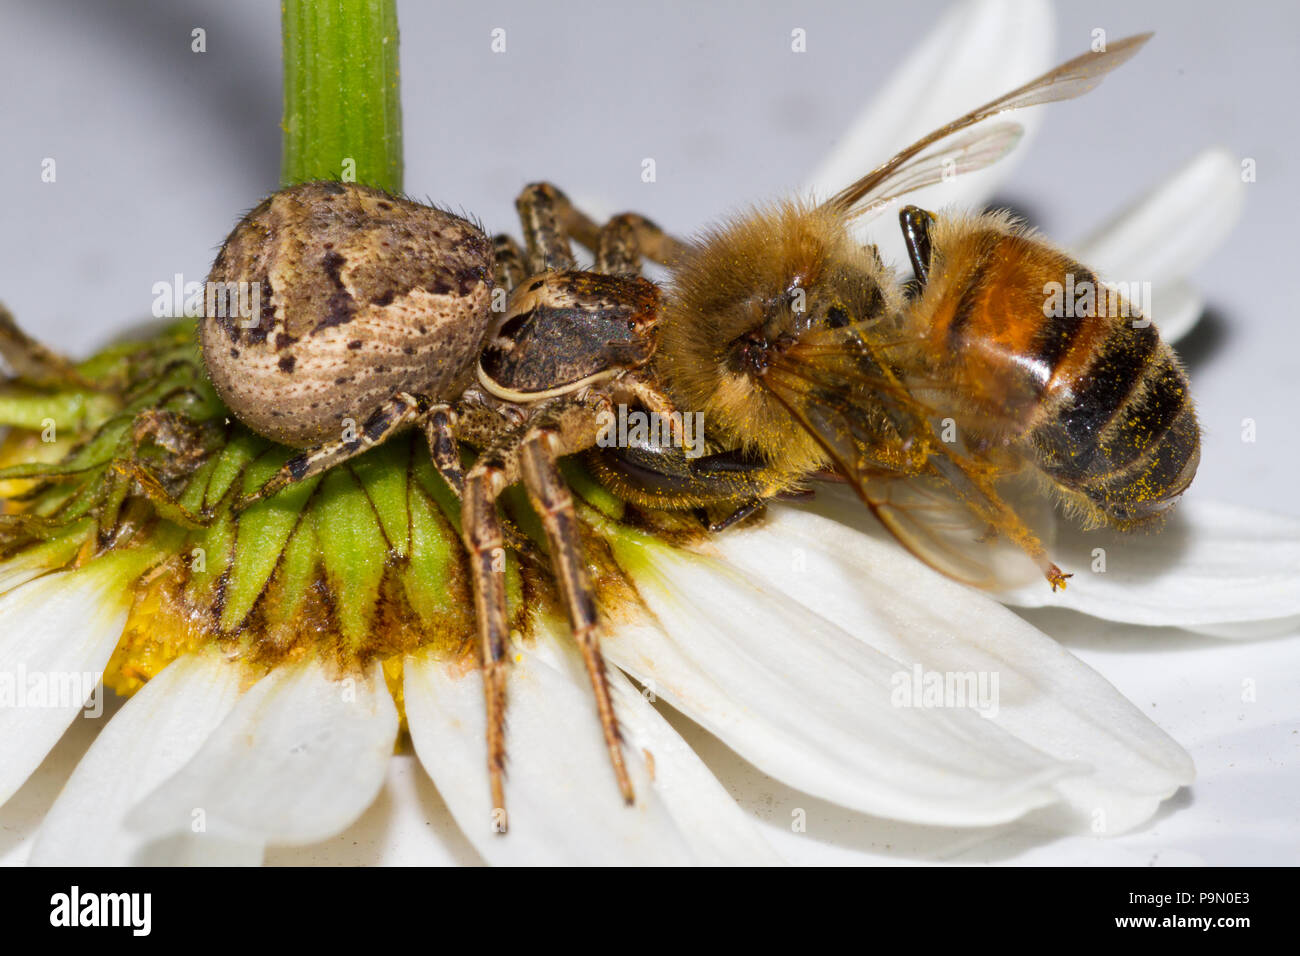 A spider eating a honey bee. Apis mellifera. Stock Photo